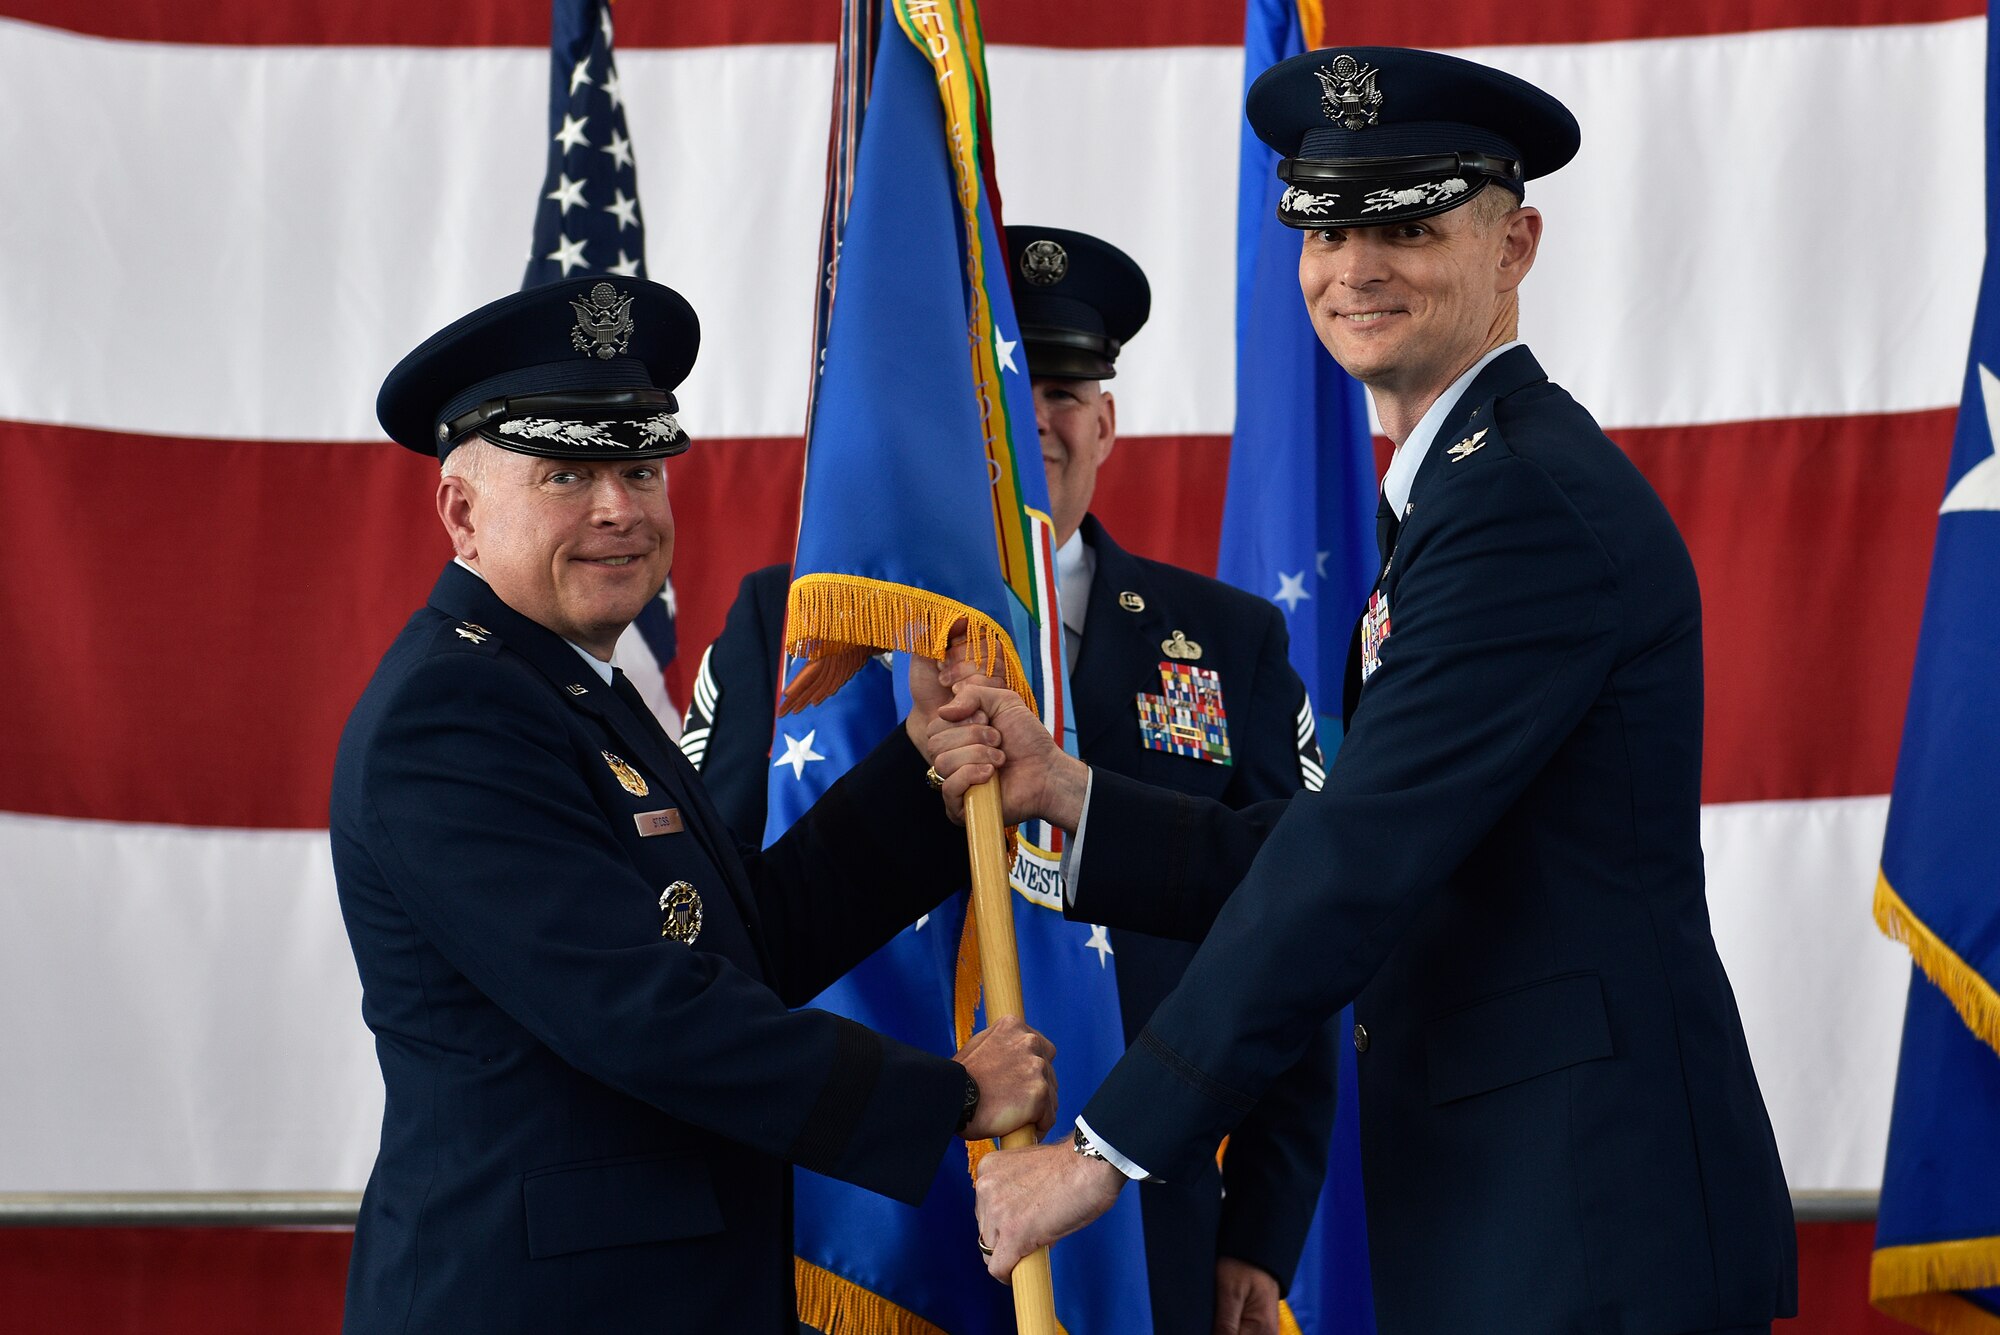 Col. David Miller (right), incoming 377th Air Base Wing commander, receives the guidon and command of the 377th Air Base Wing from 20th Air Force Commander Maj. Gen. Ferdinand B. Stoss III in a ceremony June 21, 2019 at Kirtland Air Force Base. Stoss officiated the transfer of command from former commander Col. Richard Gibbs in a traditional change of command ceremony at Kirtland’s Hangar 333. Miller comes to Kirtland from Malmstrom AFB, Mont., where he was commander of the 341st Maintenance Group. Gibbs, selected for brigadier general, is on his way to Air Mobility Command and Scott AFB, Ill., where he will become the Director of Logistics, Engineering, and Force Protection (A4). (U.S. Air Force photo by Airman 1st Class Austin J. Prisbrey)